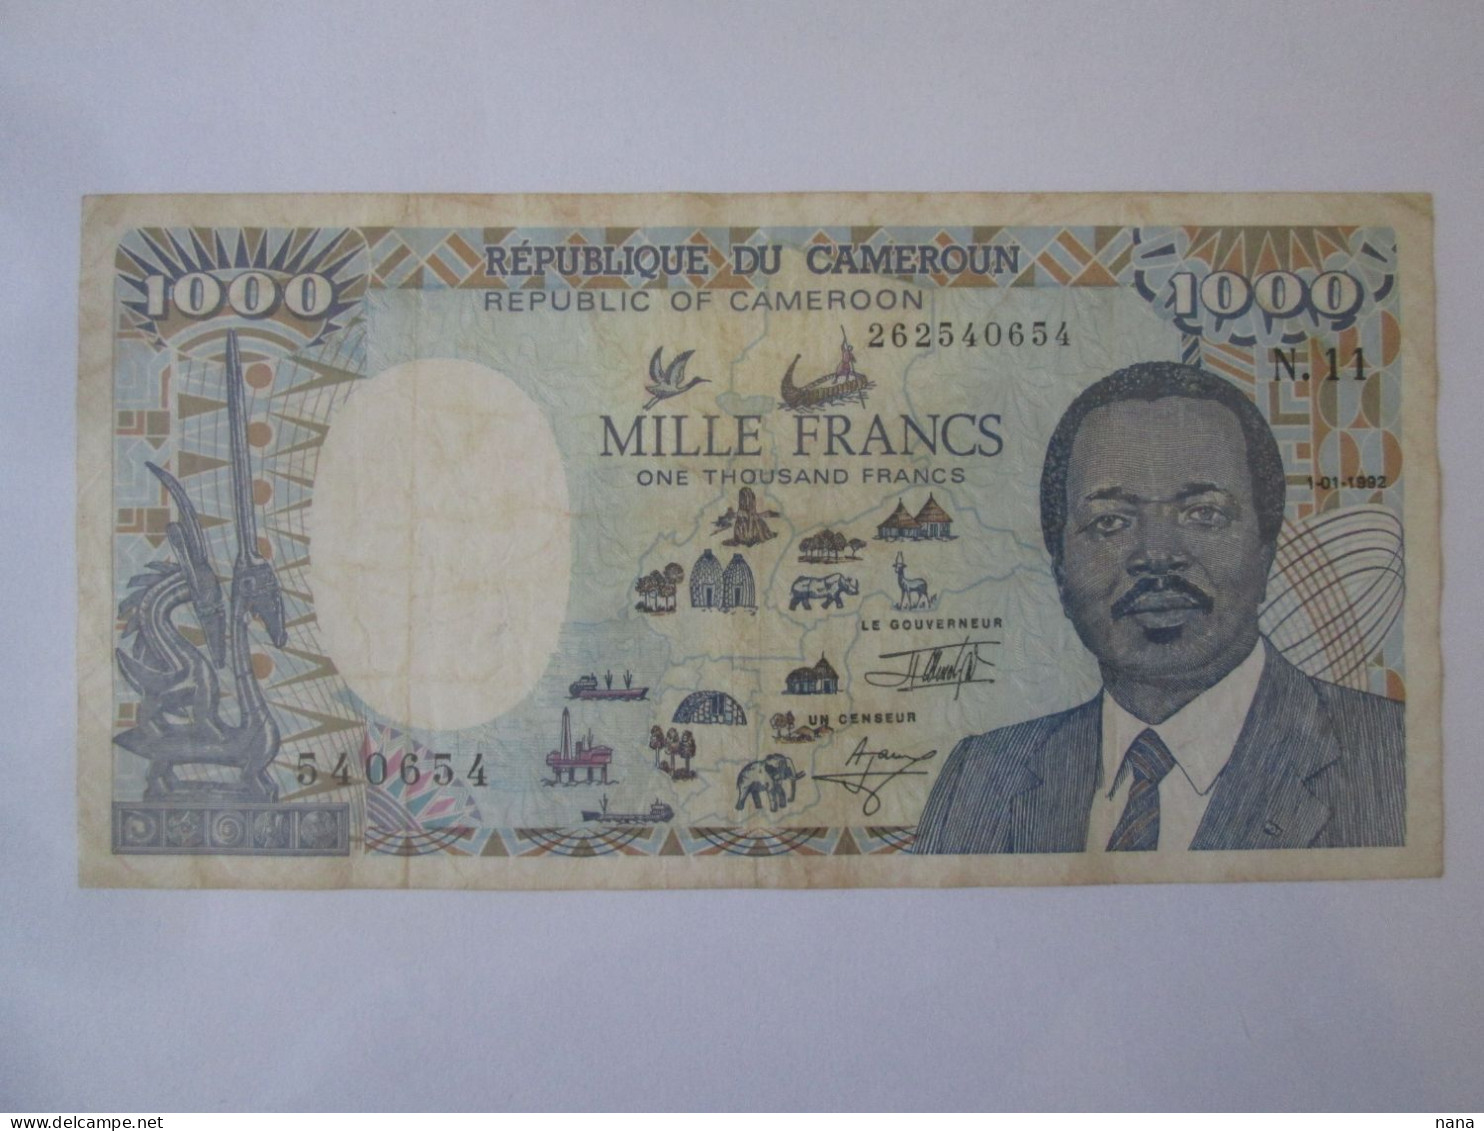 Rare Year! Cameroon 1000 Francs 1992 Banknote,see Pictures - Cameroon